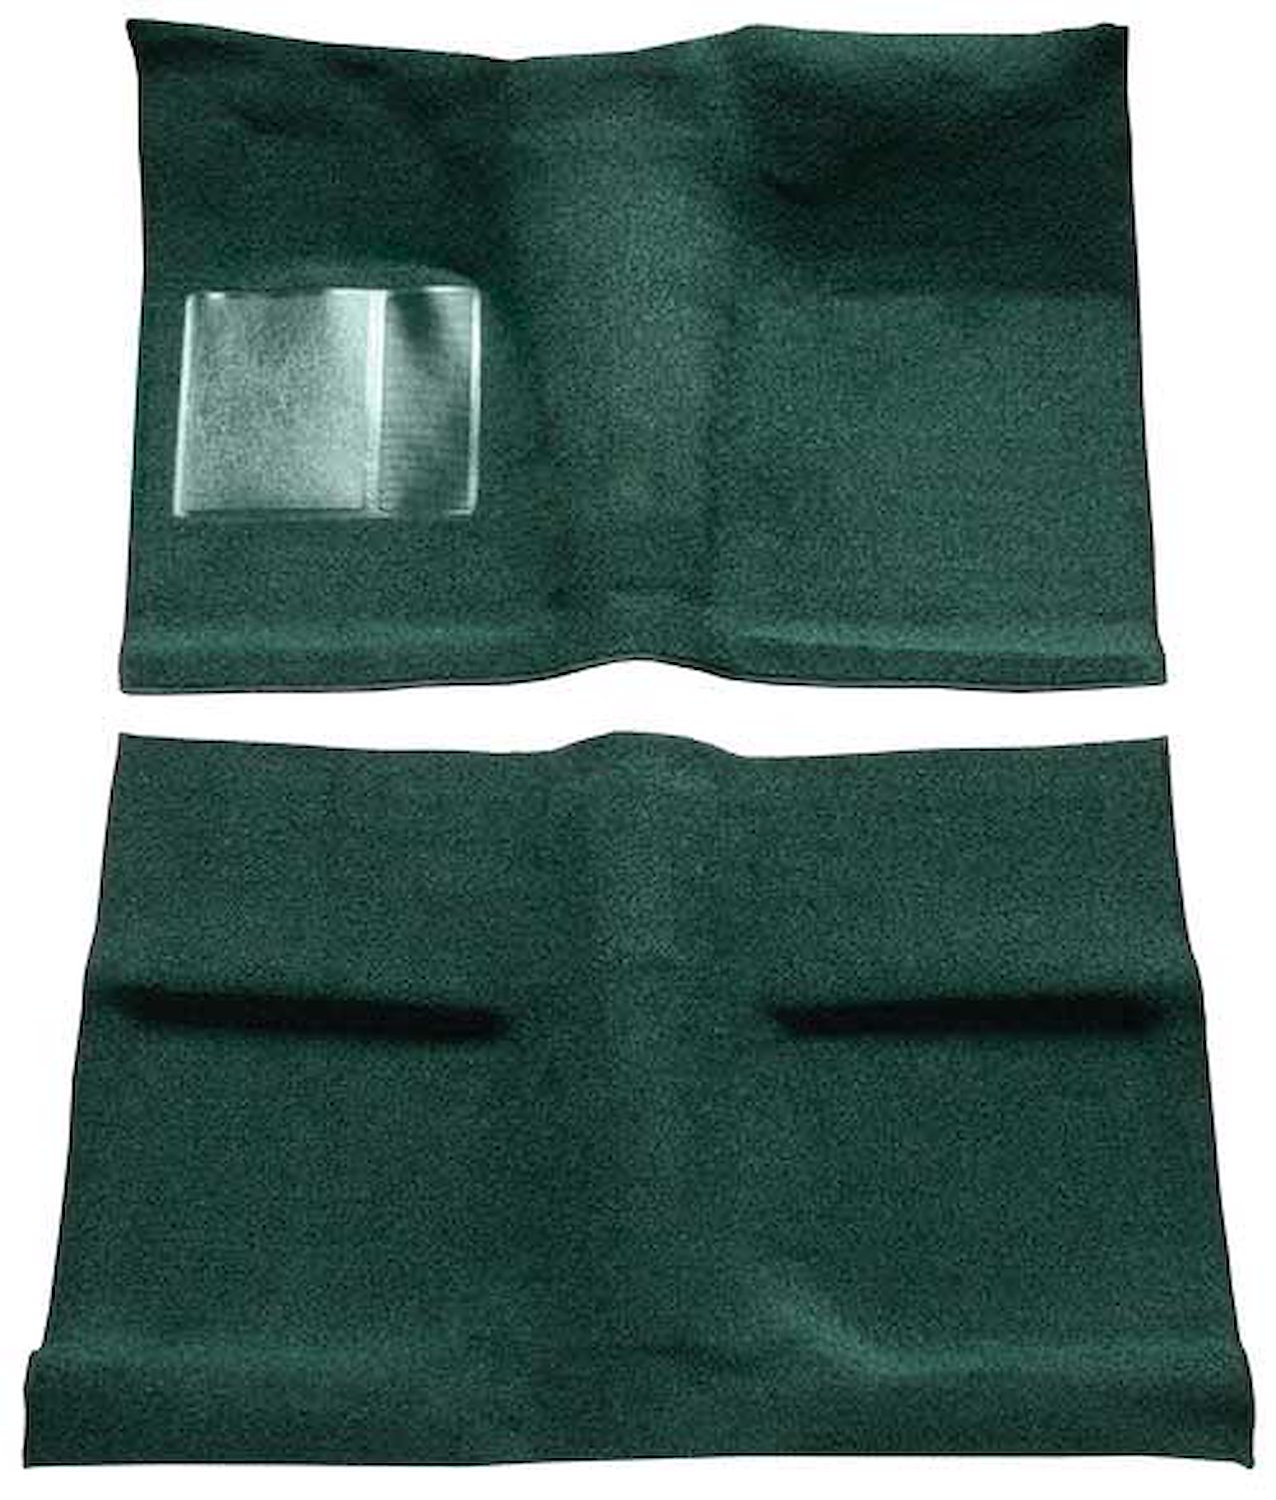 A4030B13 Passenger Area Loop Flooe Carpet Set With Mass Backing 1964 Mustang Coupe; Dark Green